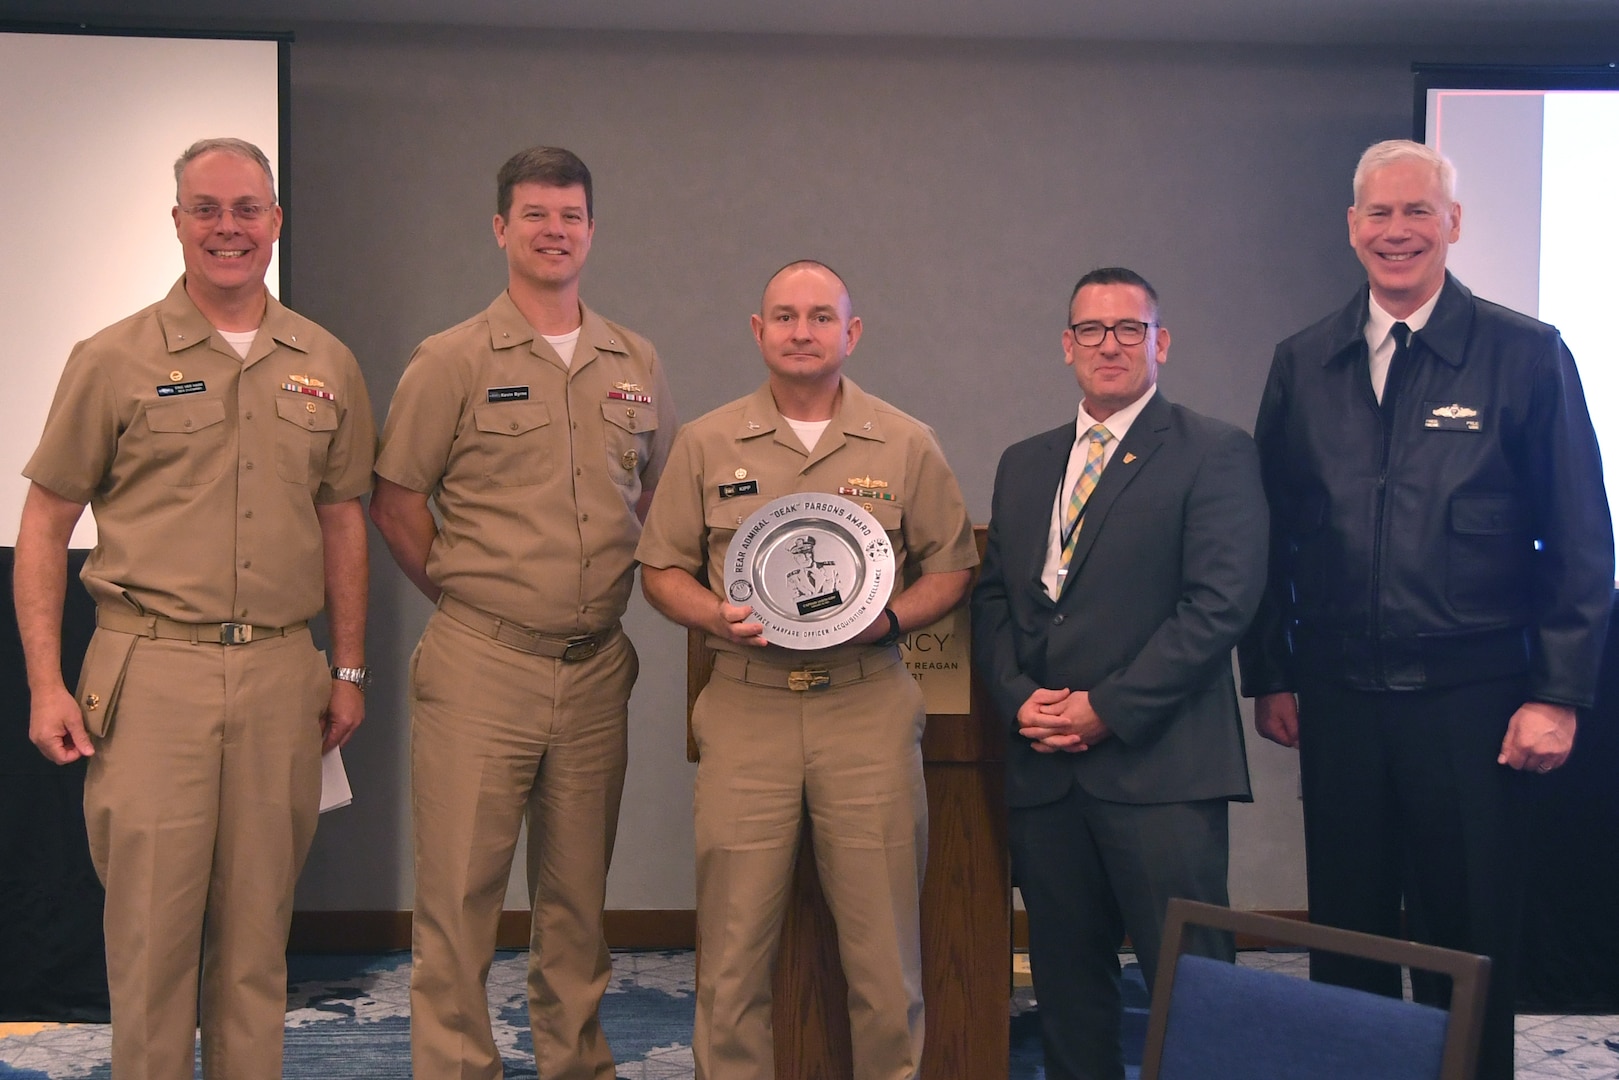 (From left to right) Rear Adm. Eric Ver Hage, Commander for Regional Maintenance Center and NAVSEA director, Surface Ship Maintenance and Modernization, Rear Adm. Kevin Byrne, Commander of Naval Surface Warfare Center and Naval Undersea Warfare Center, Capt. Jason D Kipp, Major Program Manager, Program Executive Office Atalanta Integrated Warfare Systems 8.0, Jim Day, Executive Director for Surface Warfare Division, N96, Office of the Chief of Naval Operations, Rear Adm. Fred Pyle, Director for Surface Warfare Division, N96, Office of the Chief of Naval Operations,